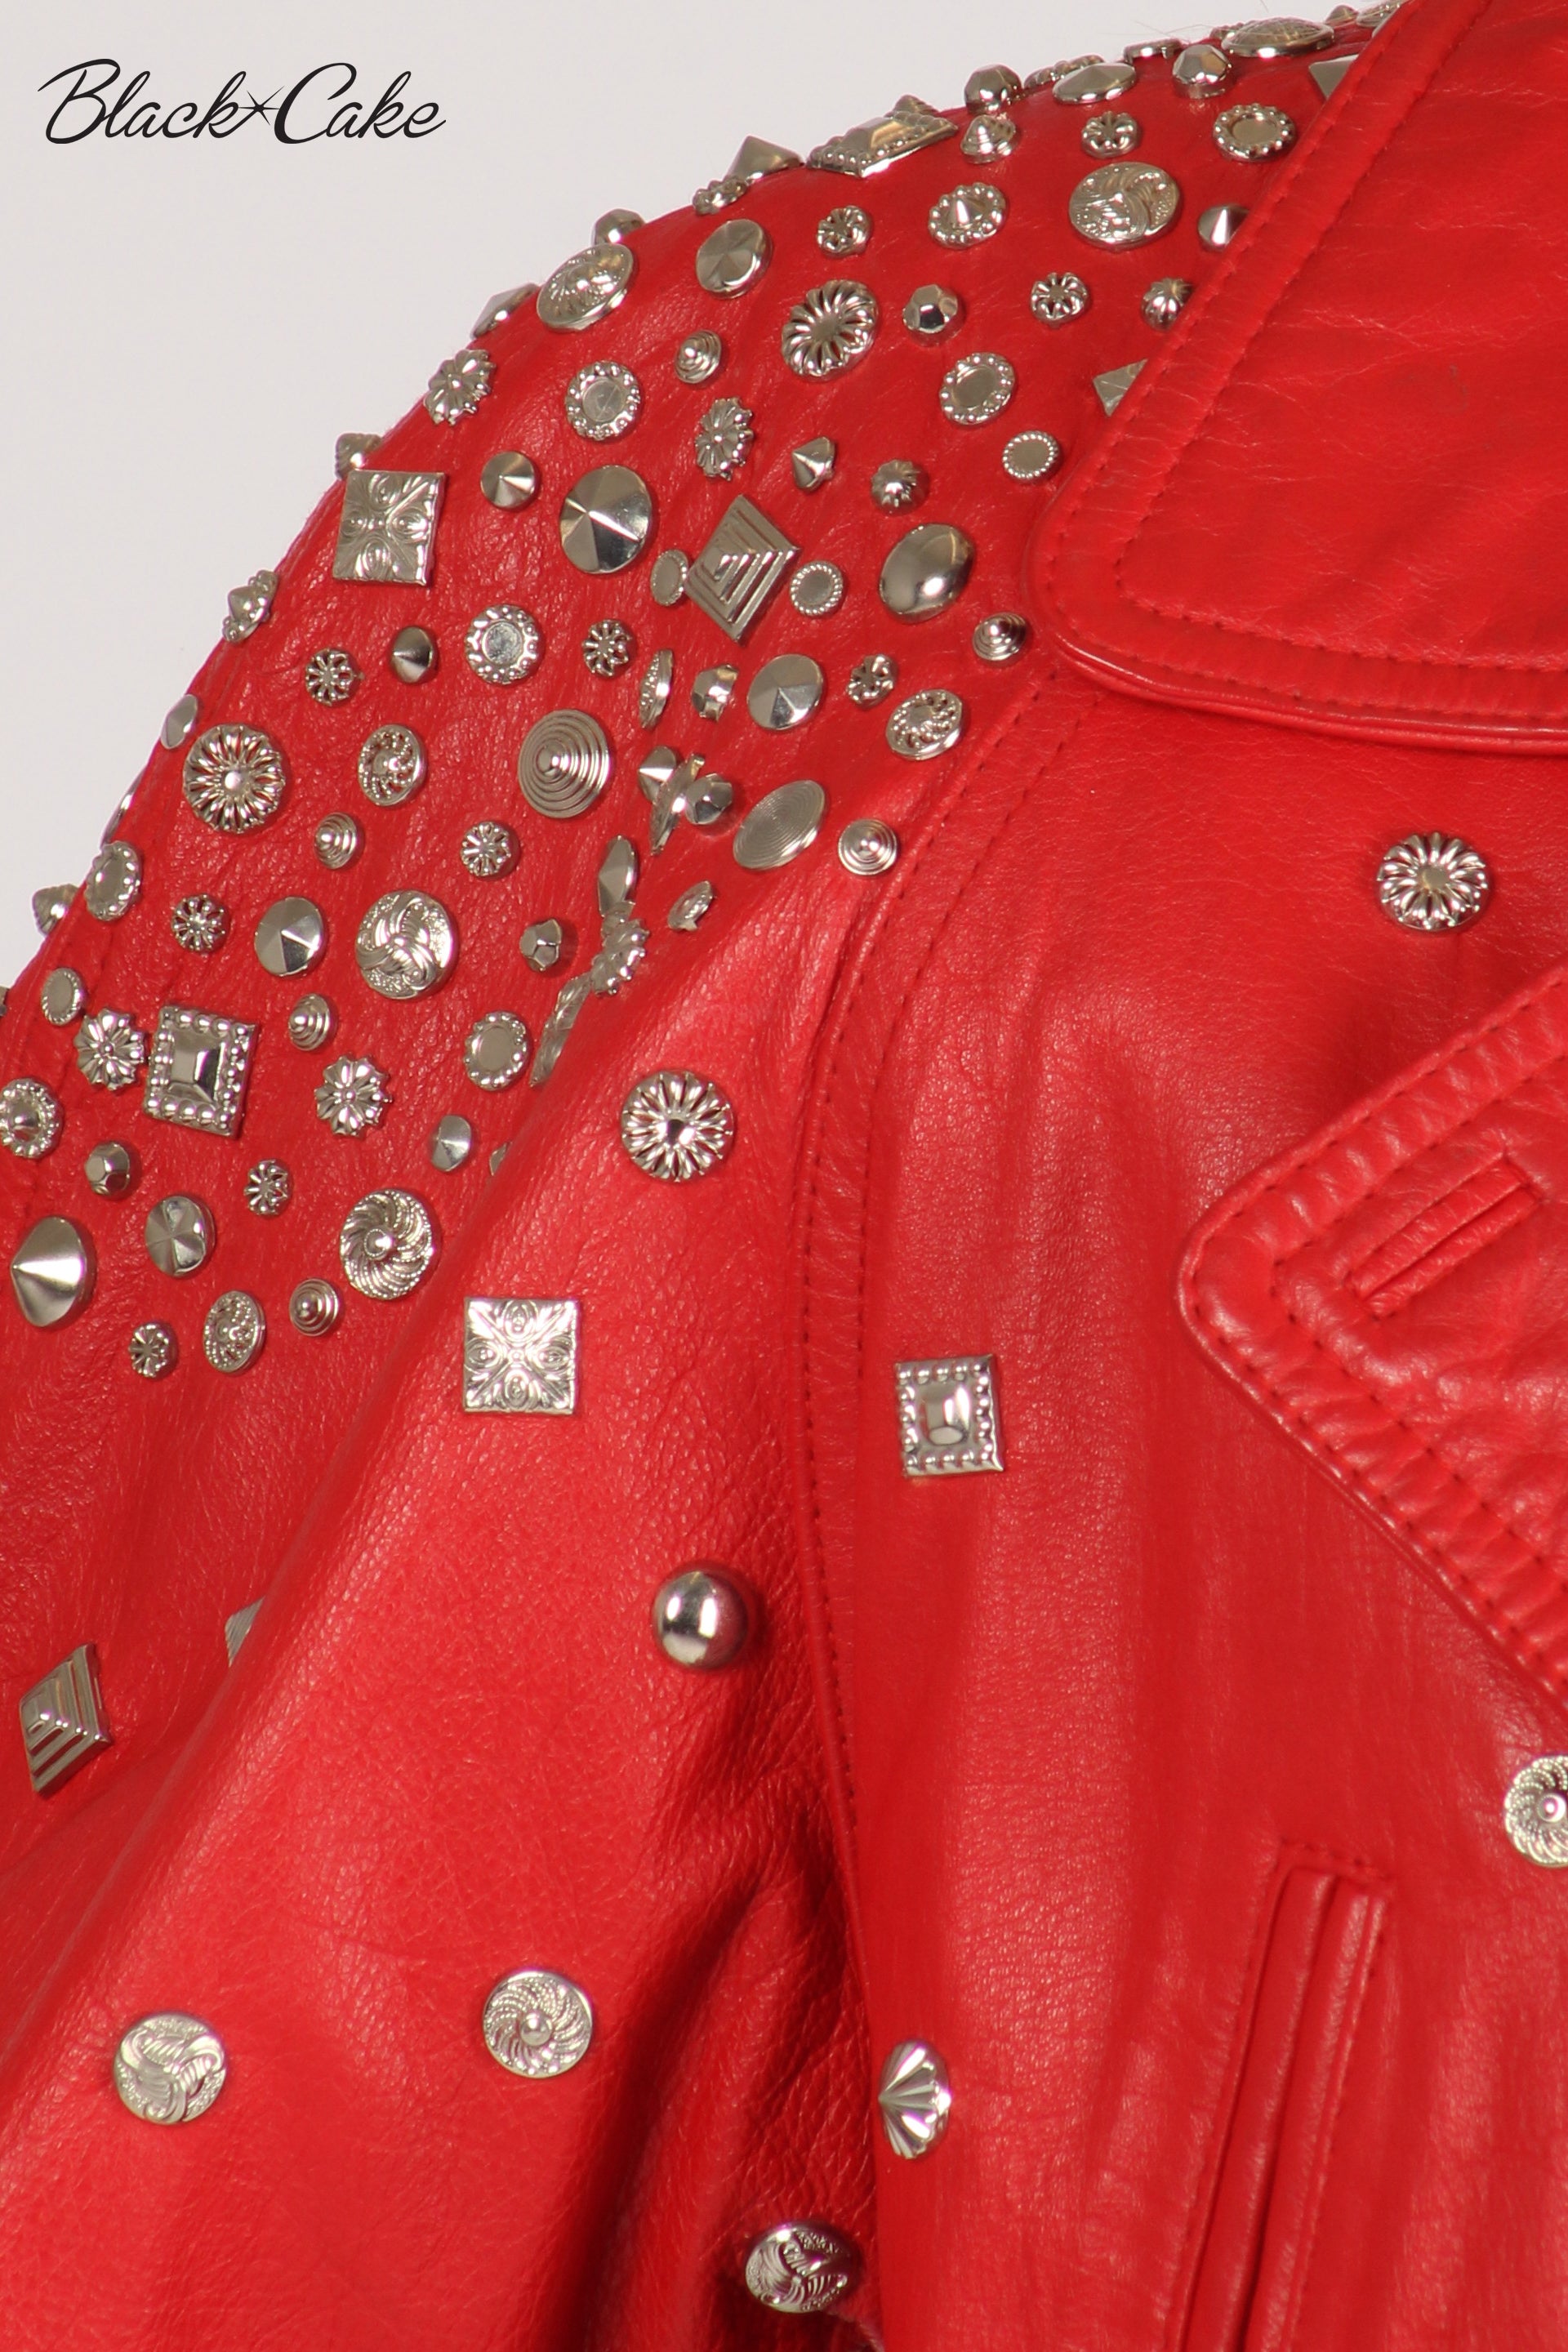 Red Upcycled Zodiac Sign Leather Jacket